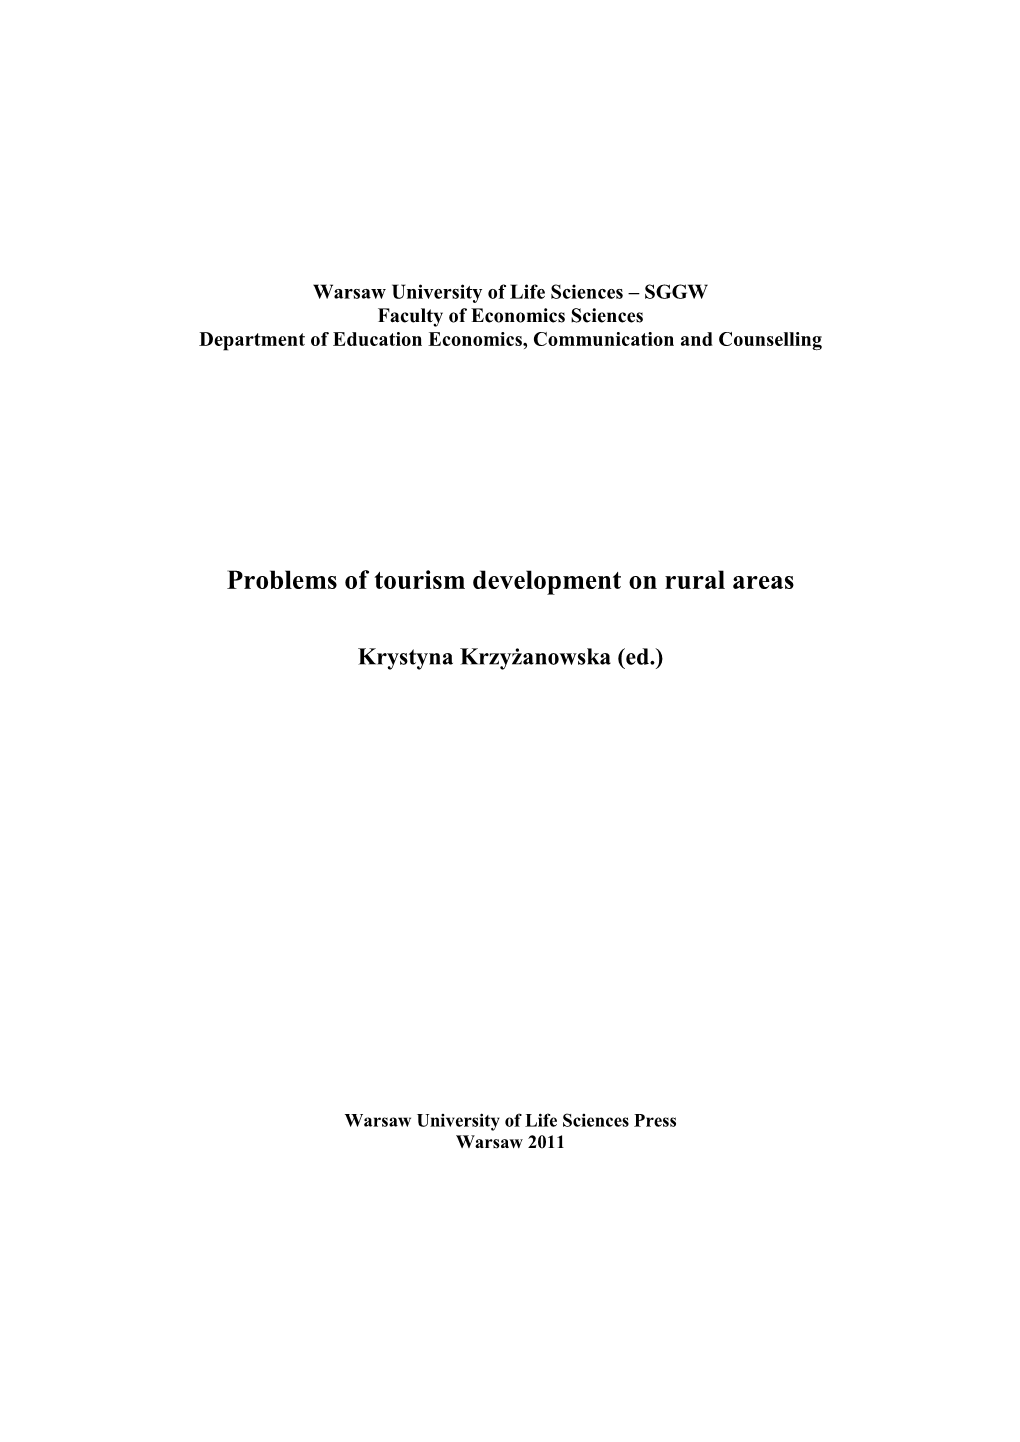 Problems of Tourism Development on Rural Areas